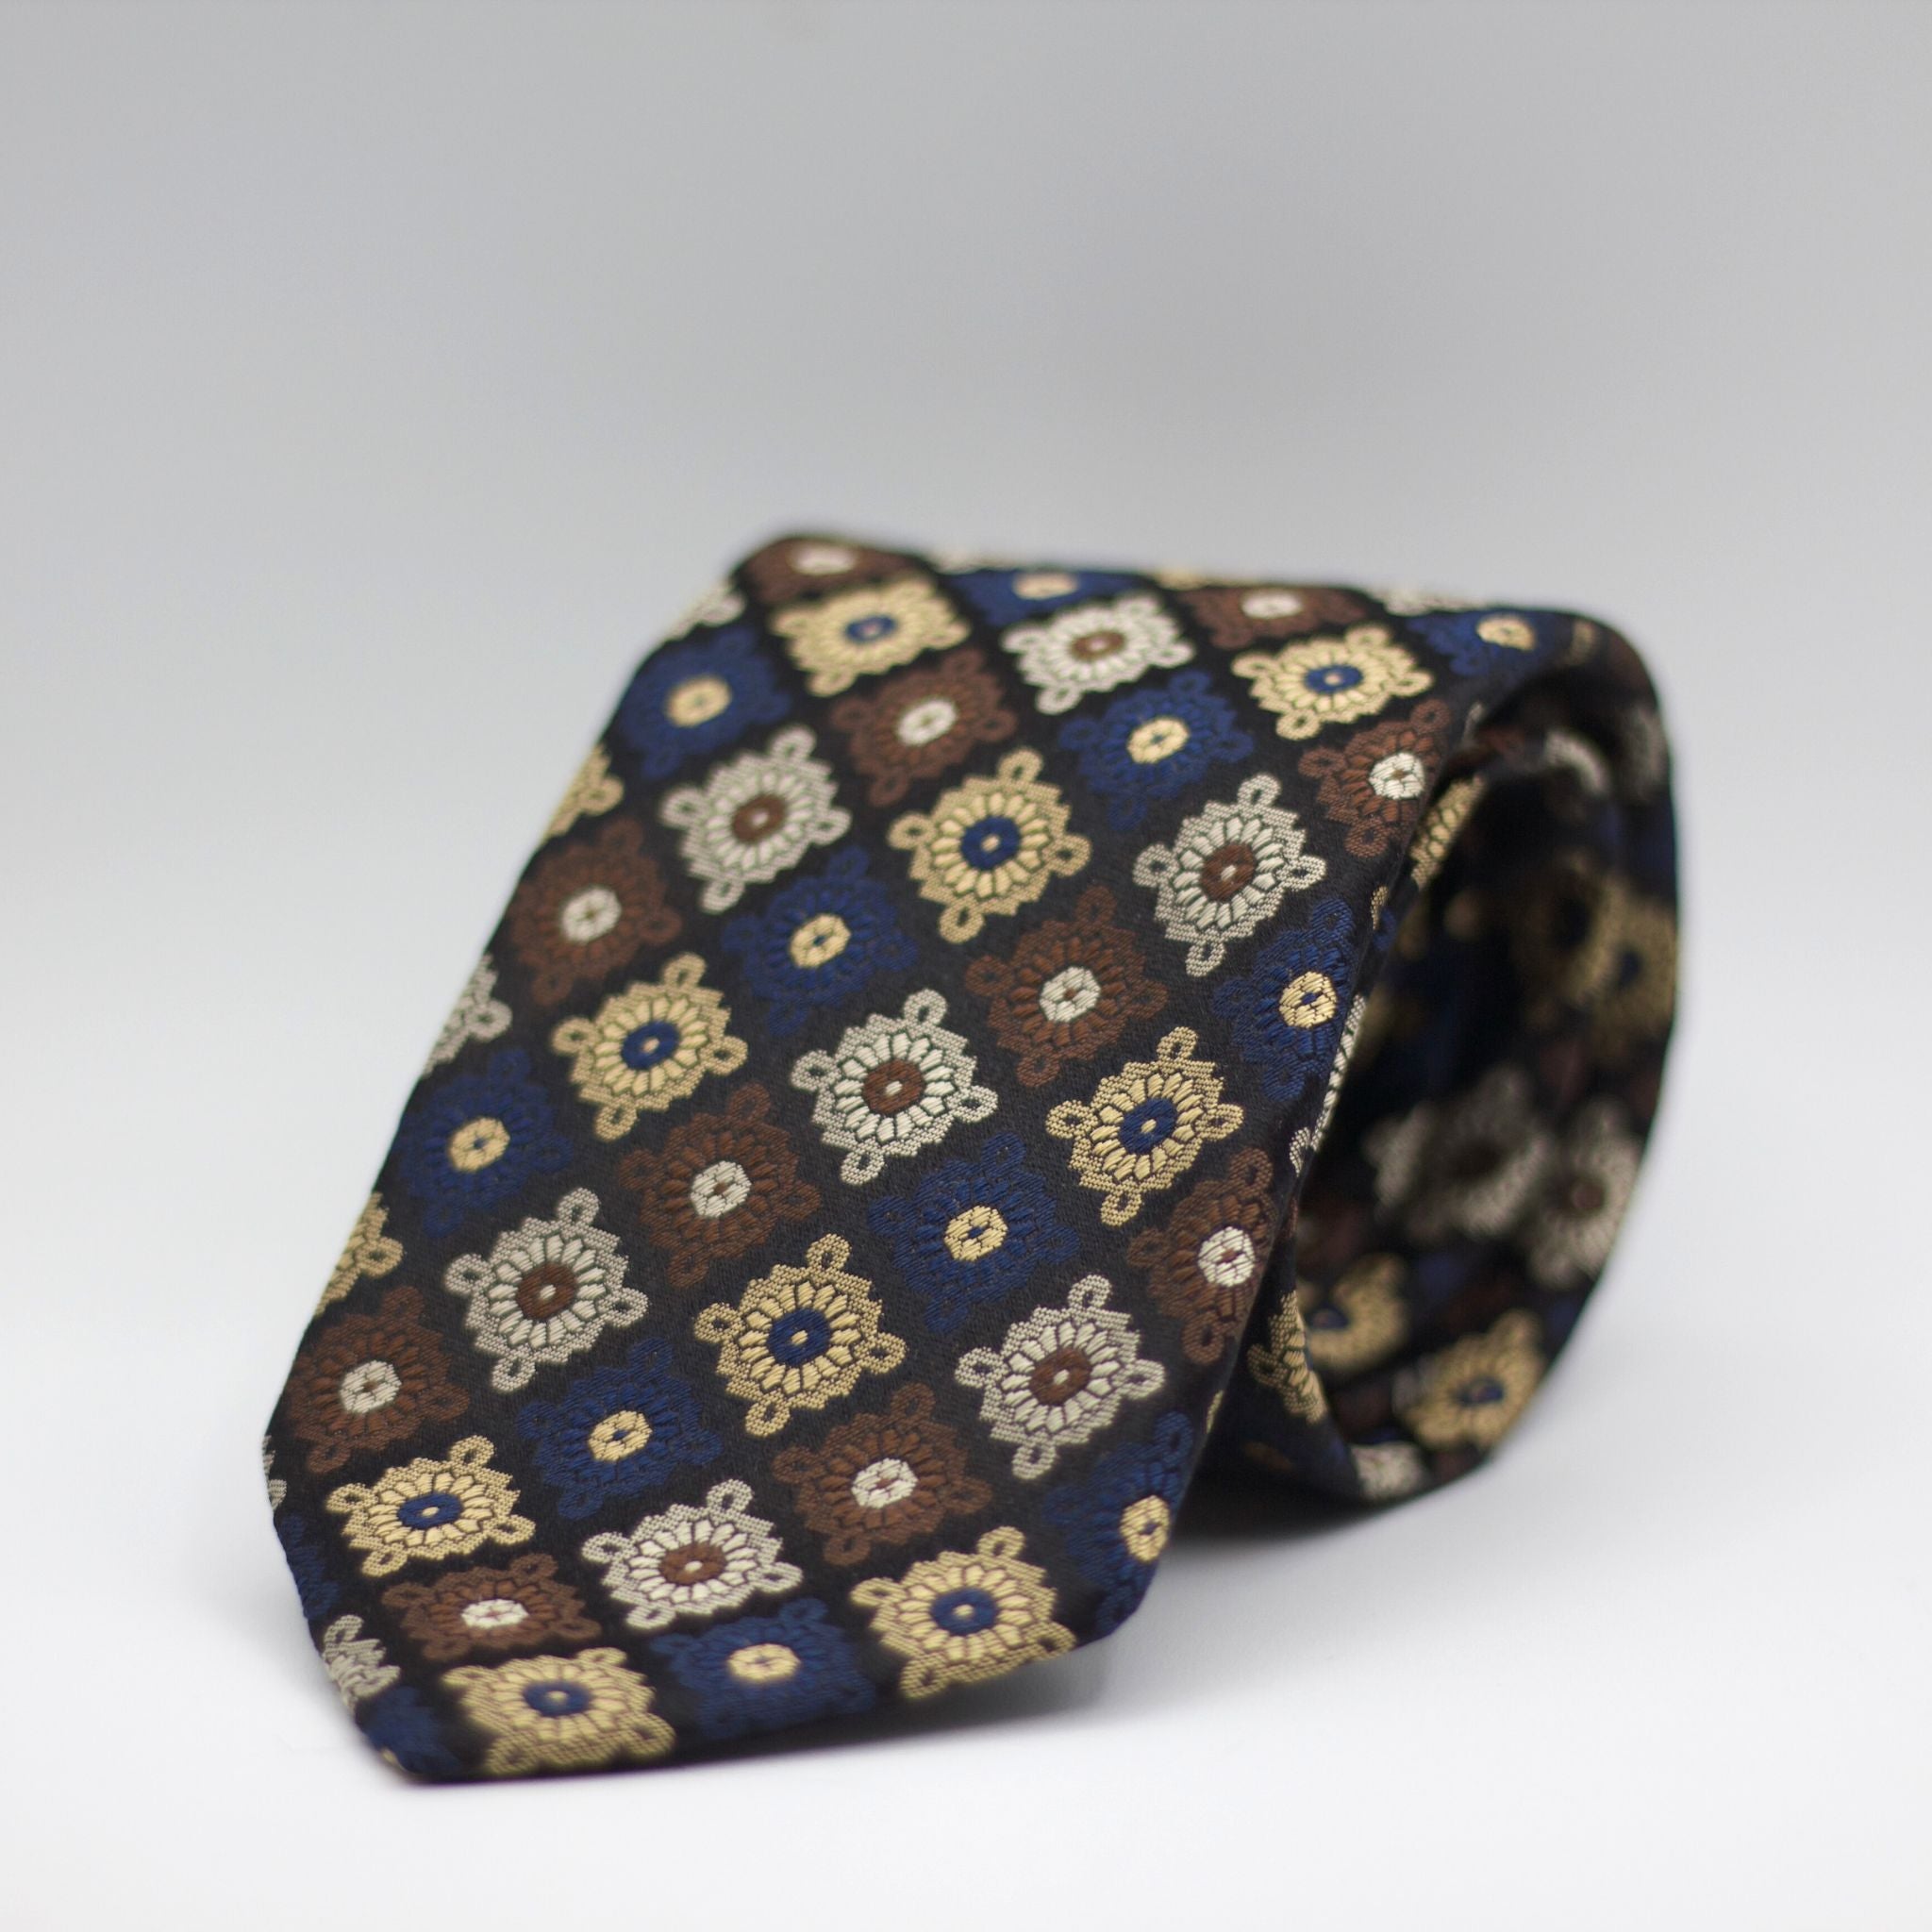 Franco Bassi for Cruciani & Bella 100% Silk Jacquard  Tipped Black, Brown, Blue, Gold and Grey Medallions tie Handmade in Italy 8 cm x 150 cm